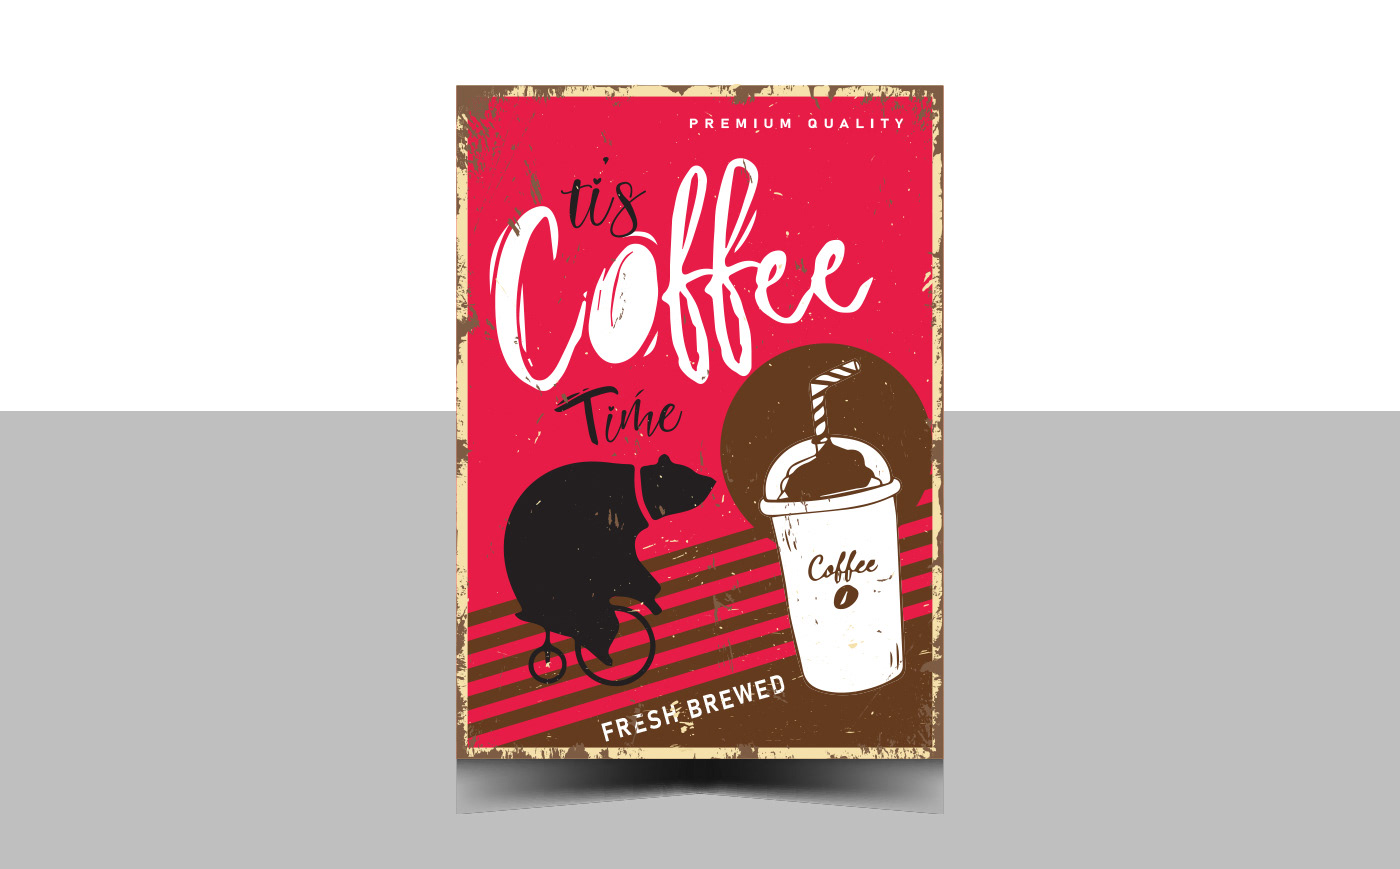 COFFEE HOUSE VINTAGE POSTER DESIGN